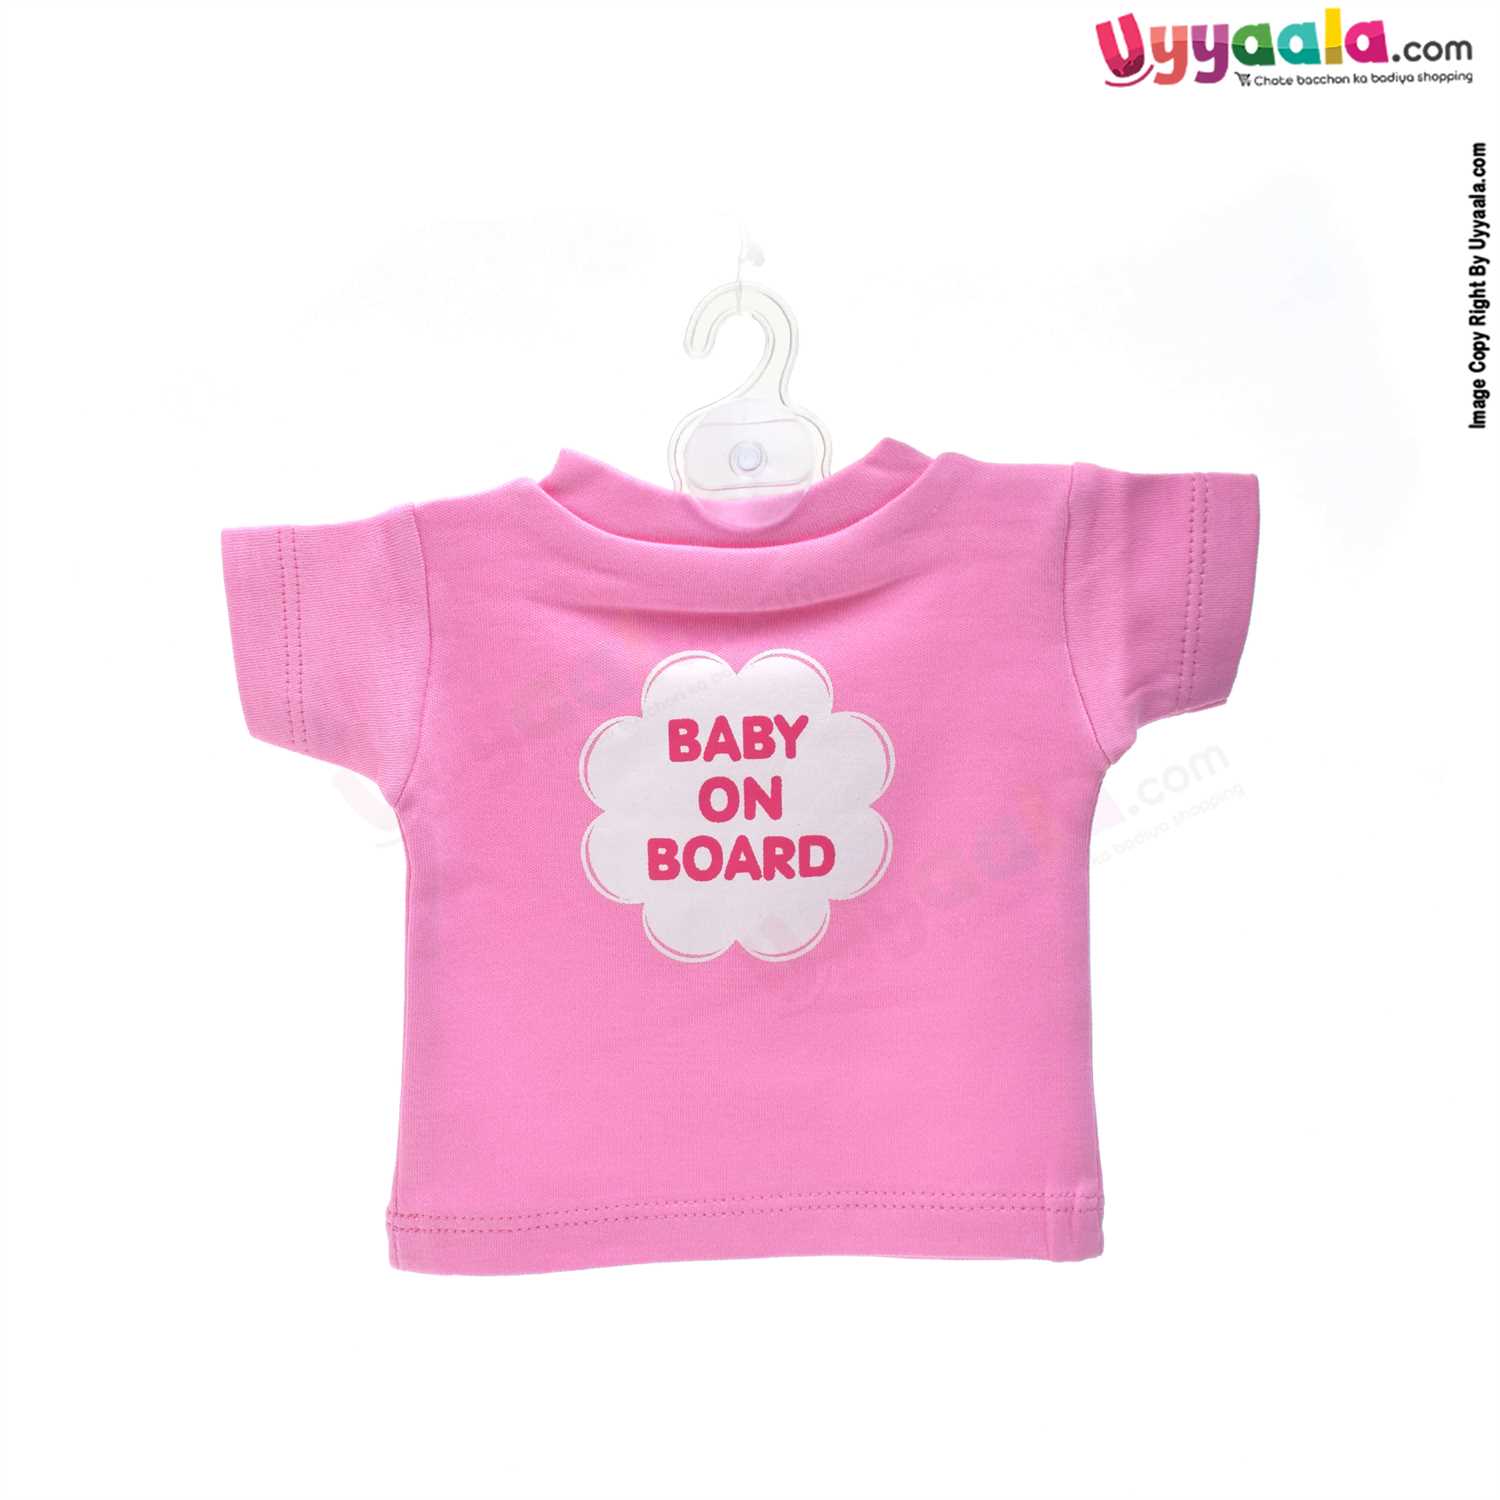 Baby on Board sign T-Shirt for Car , Size (19*16cm)